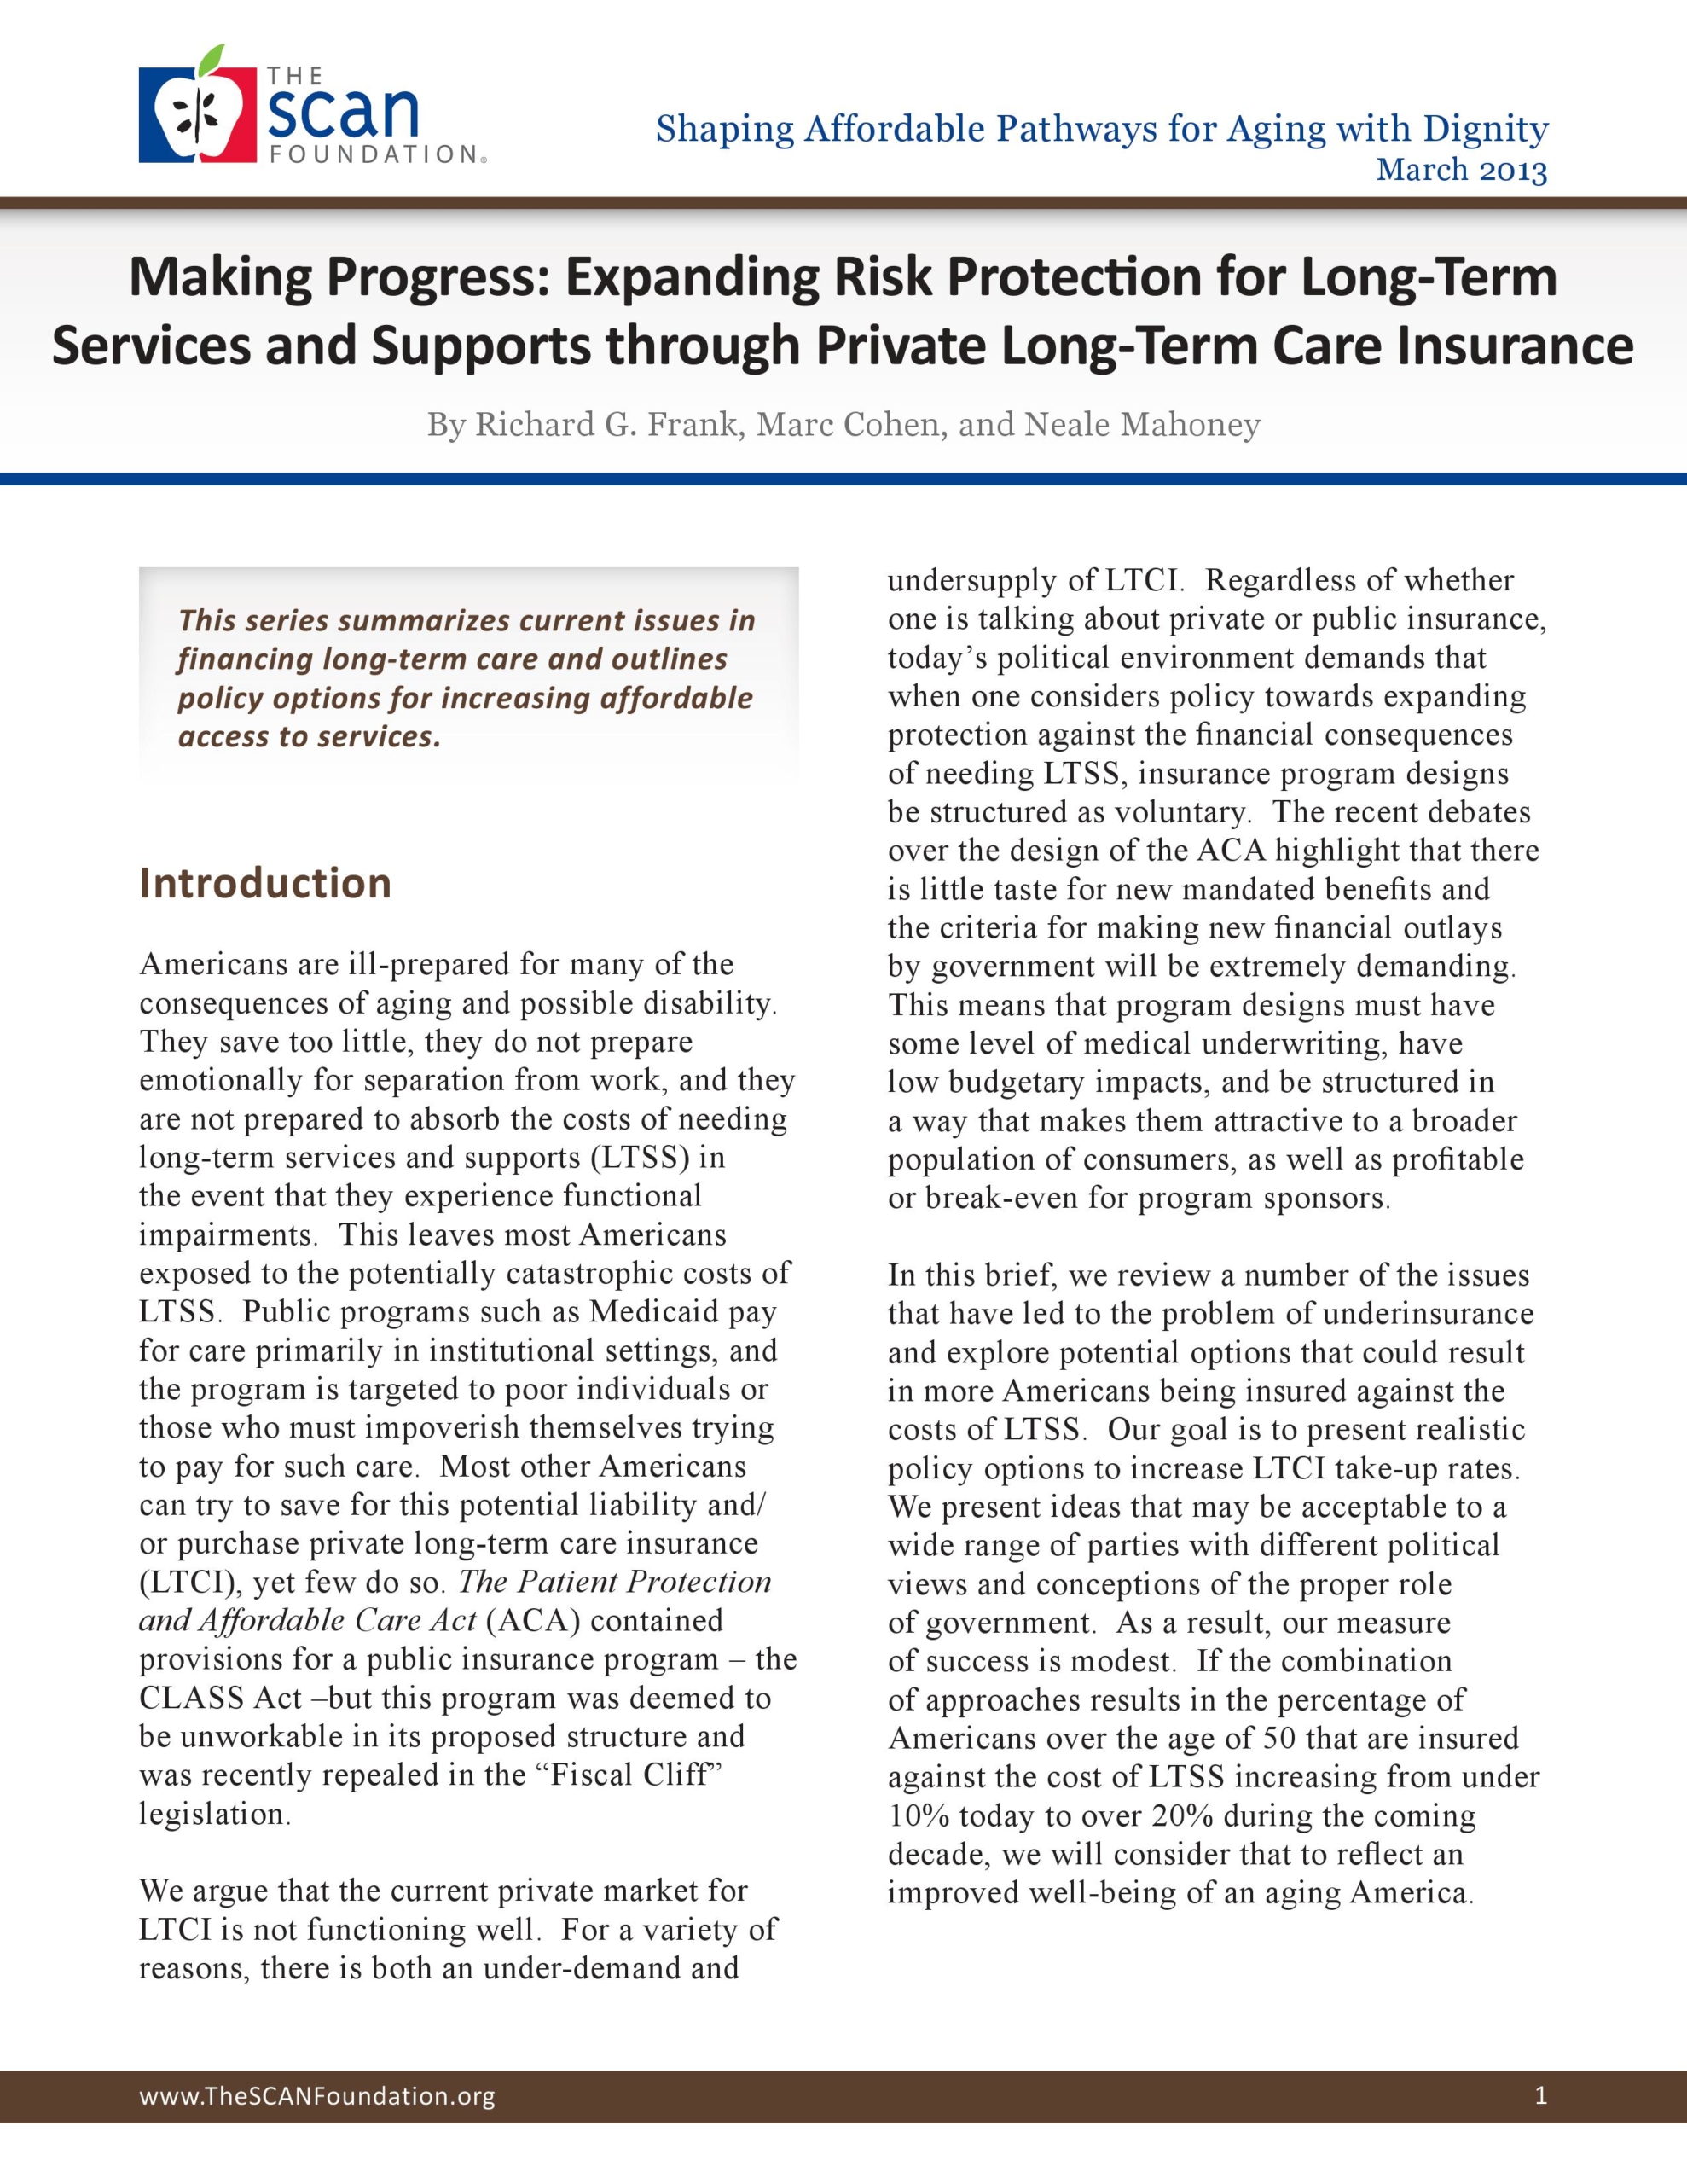 Making Progress: Expanding Risk Protection for Long-Term Services and Supports through Private Long-Term Care Insurance